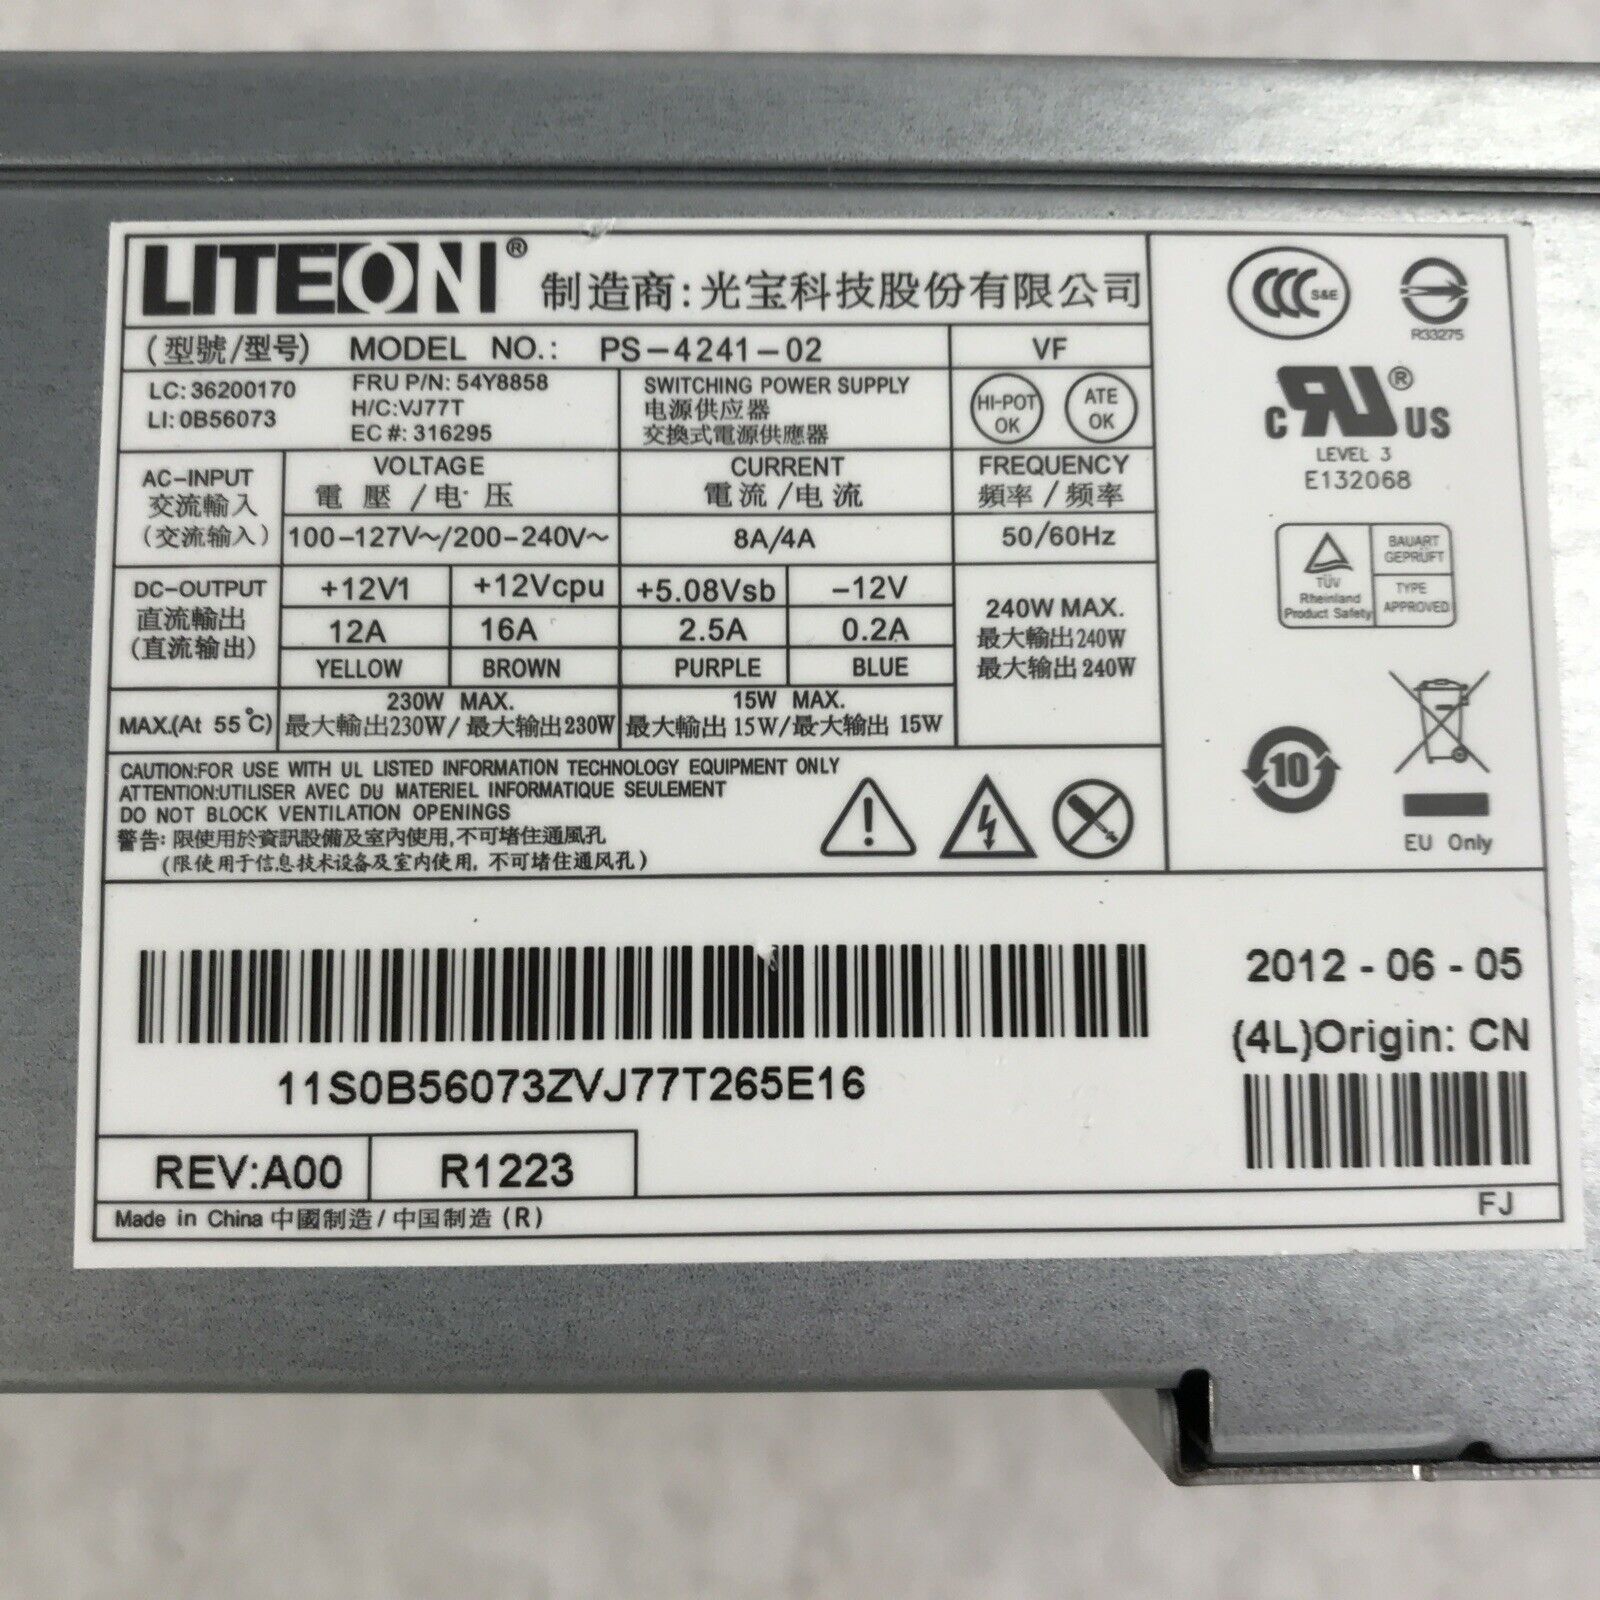 Liteon PS-4241-02 240W 8A 240V 60Hz Switching Power Supply 54Y8858